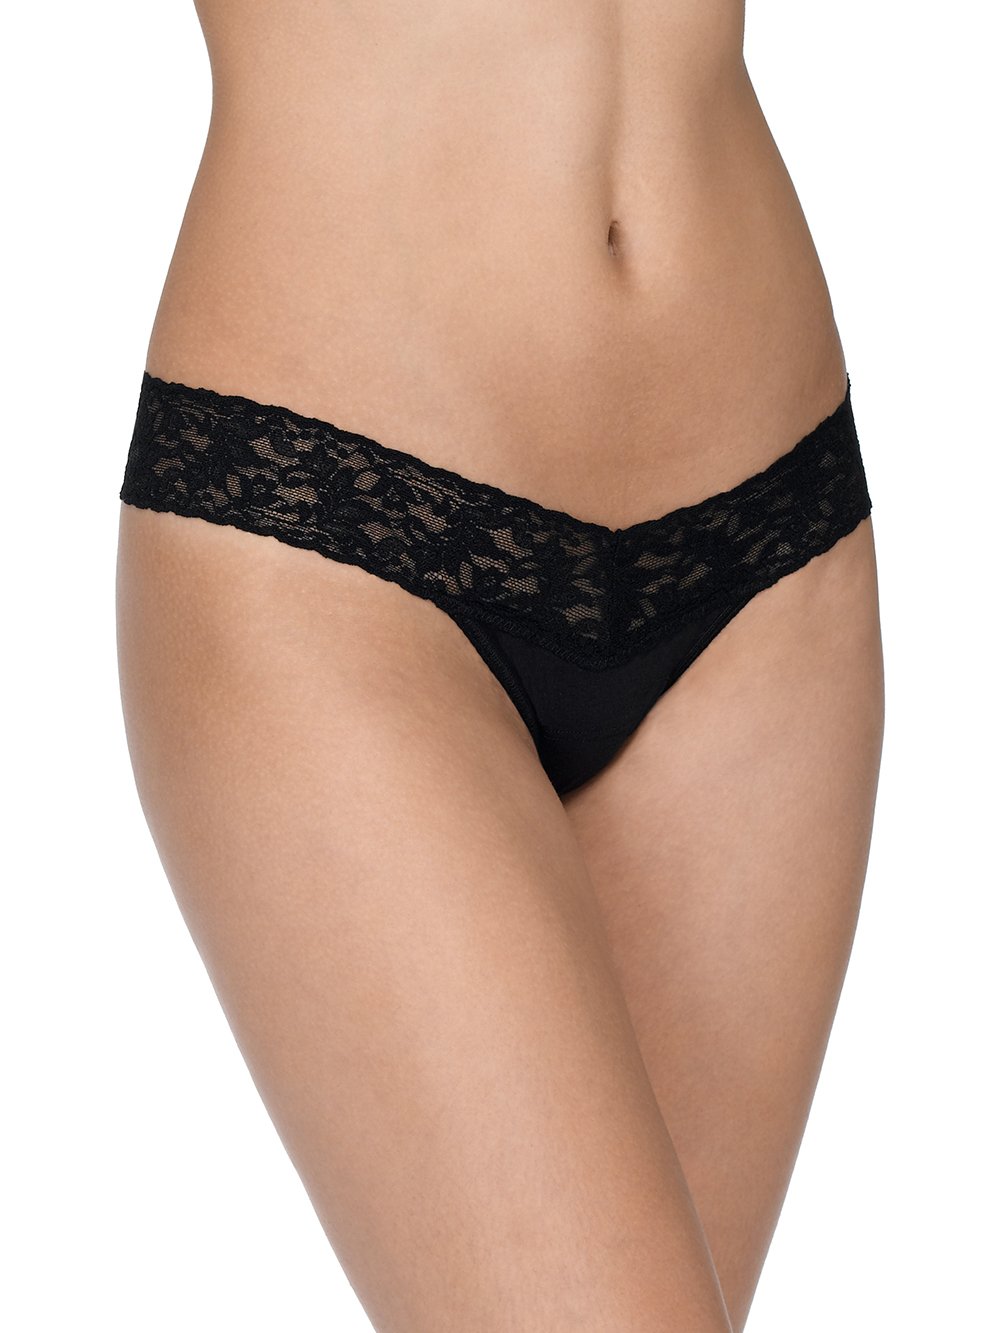 Hanky Panky Thong Black / One Size SUPIMA® Cotton *Petite Size* Low Rise Thong with Lace